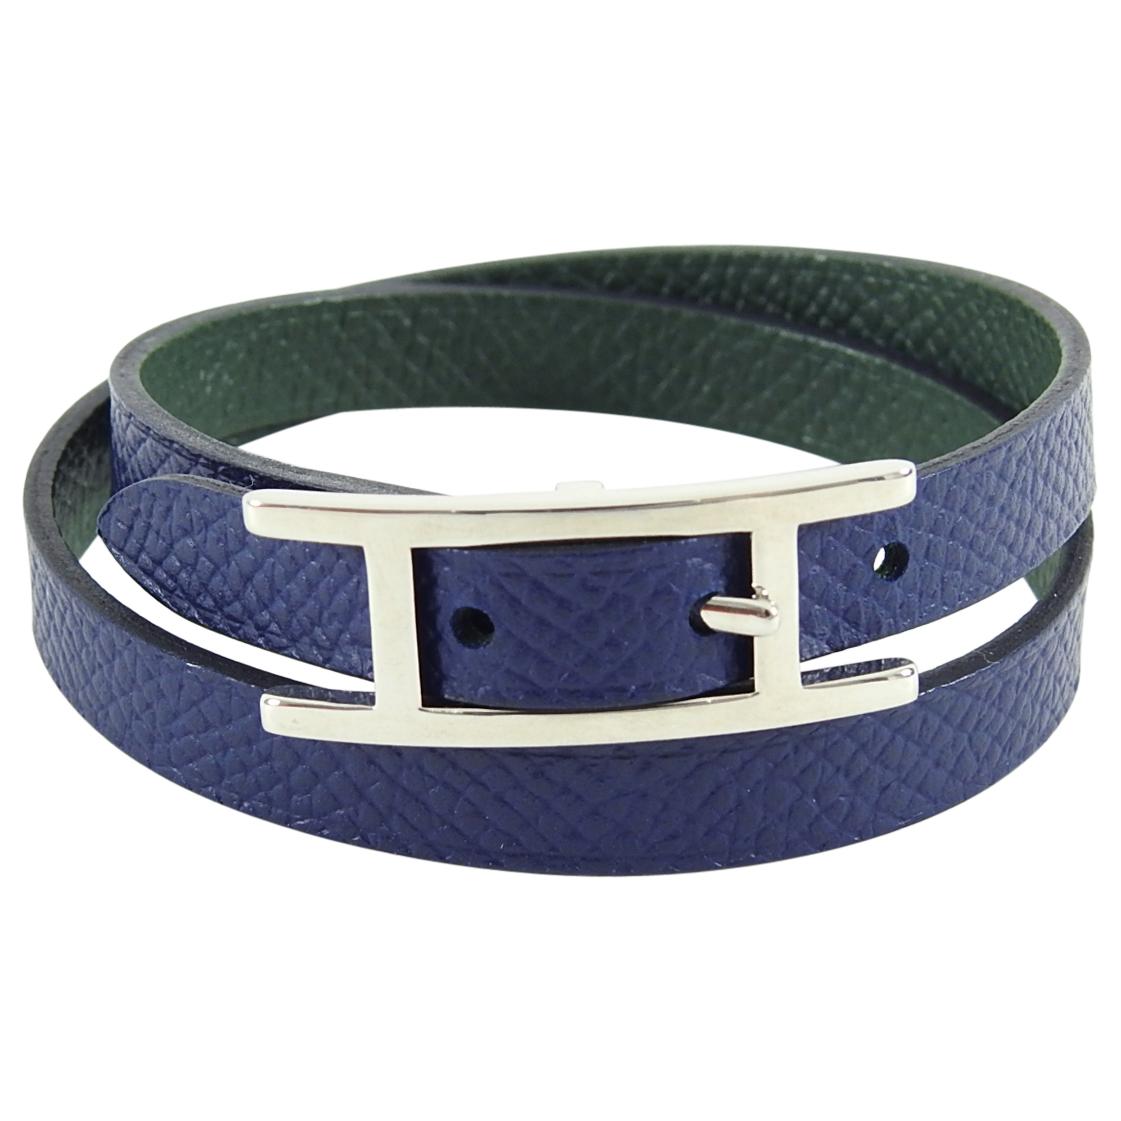 Hermes Navy Leather Behapi Double Tour Bracelet in Box.  Current price at Hermes $420 CAD. Reversible bracelet in dark navy blue and dark forest green epsom leather.  Silvertone palladium plated hardware.  Size S.  Excellent pre-owned condition with